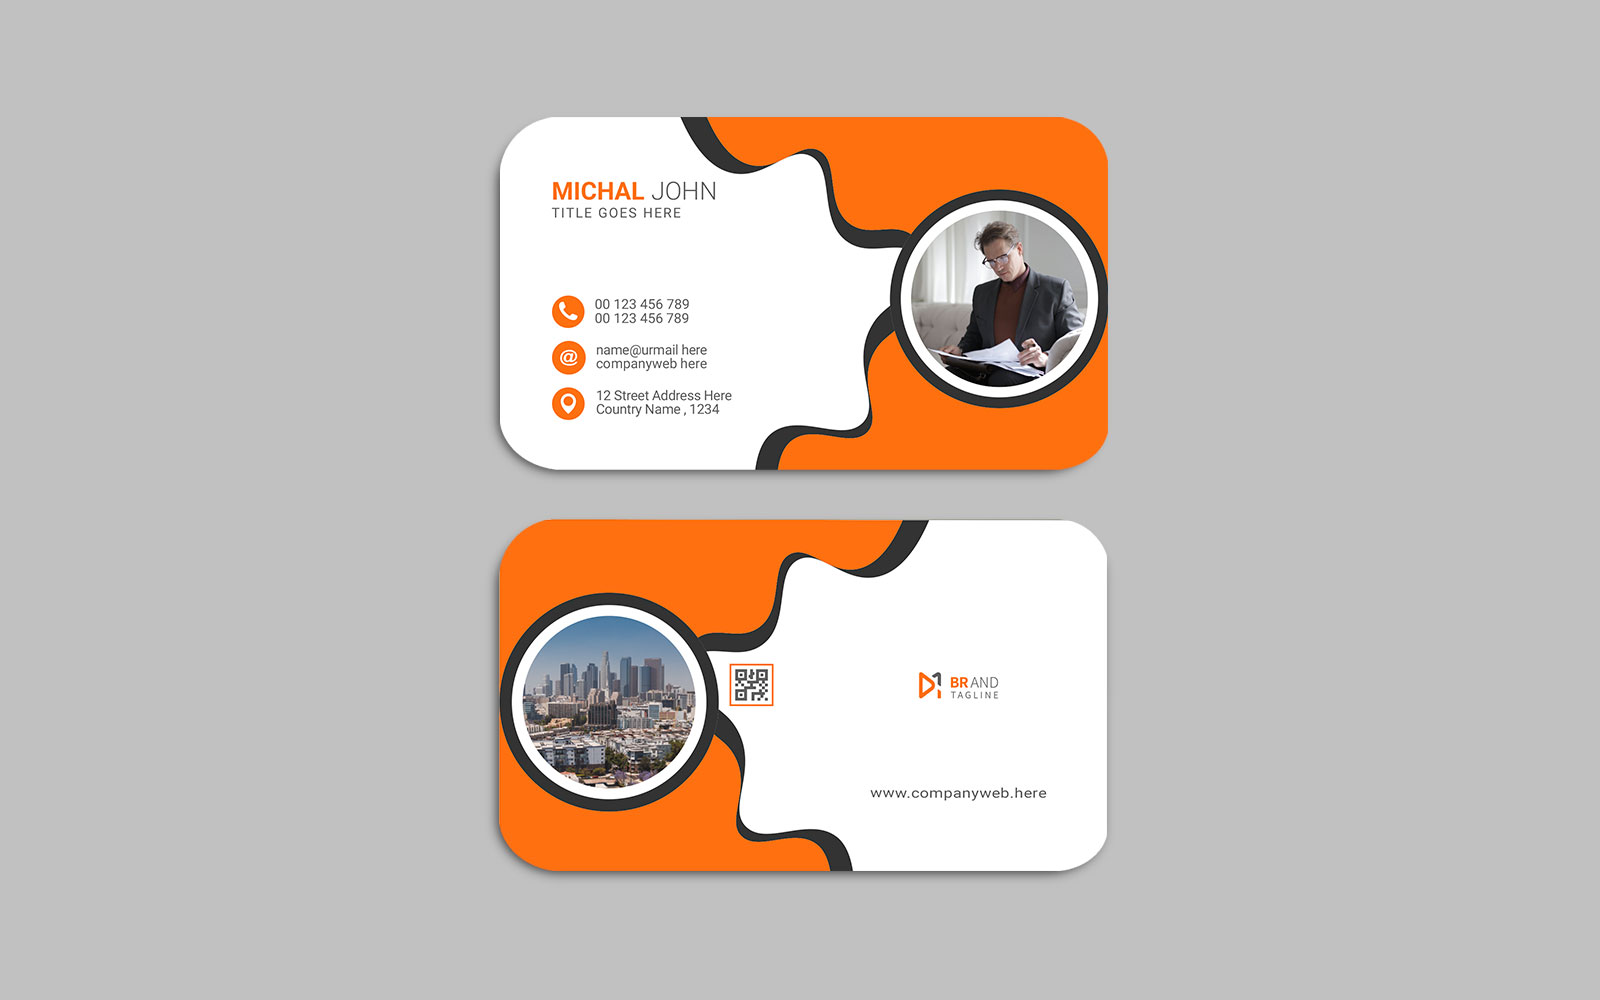 Clean and modern - name card design template